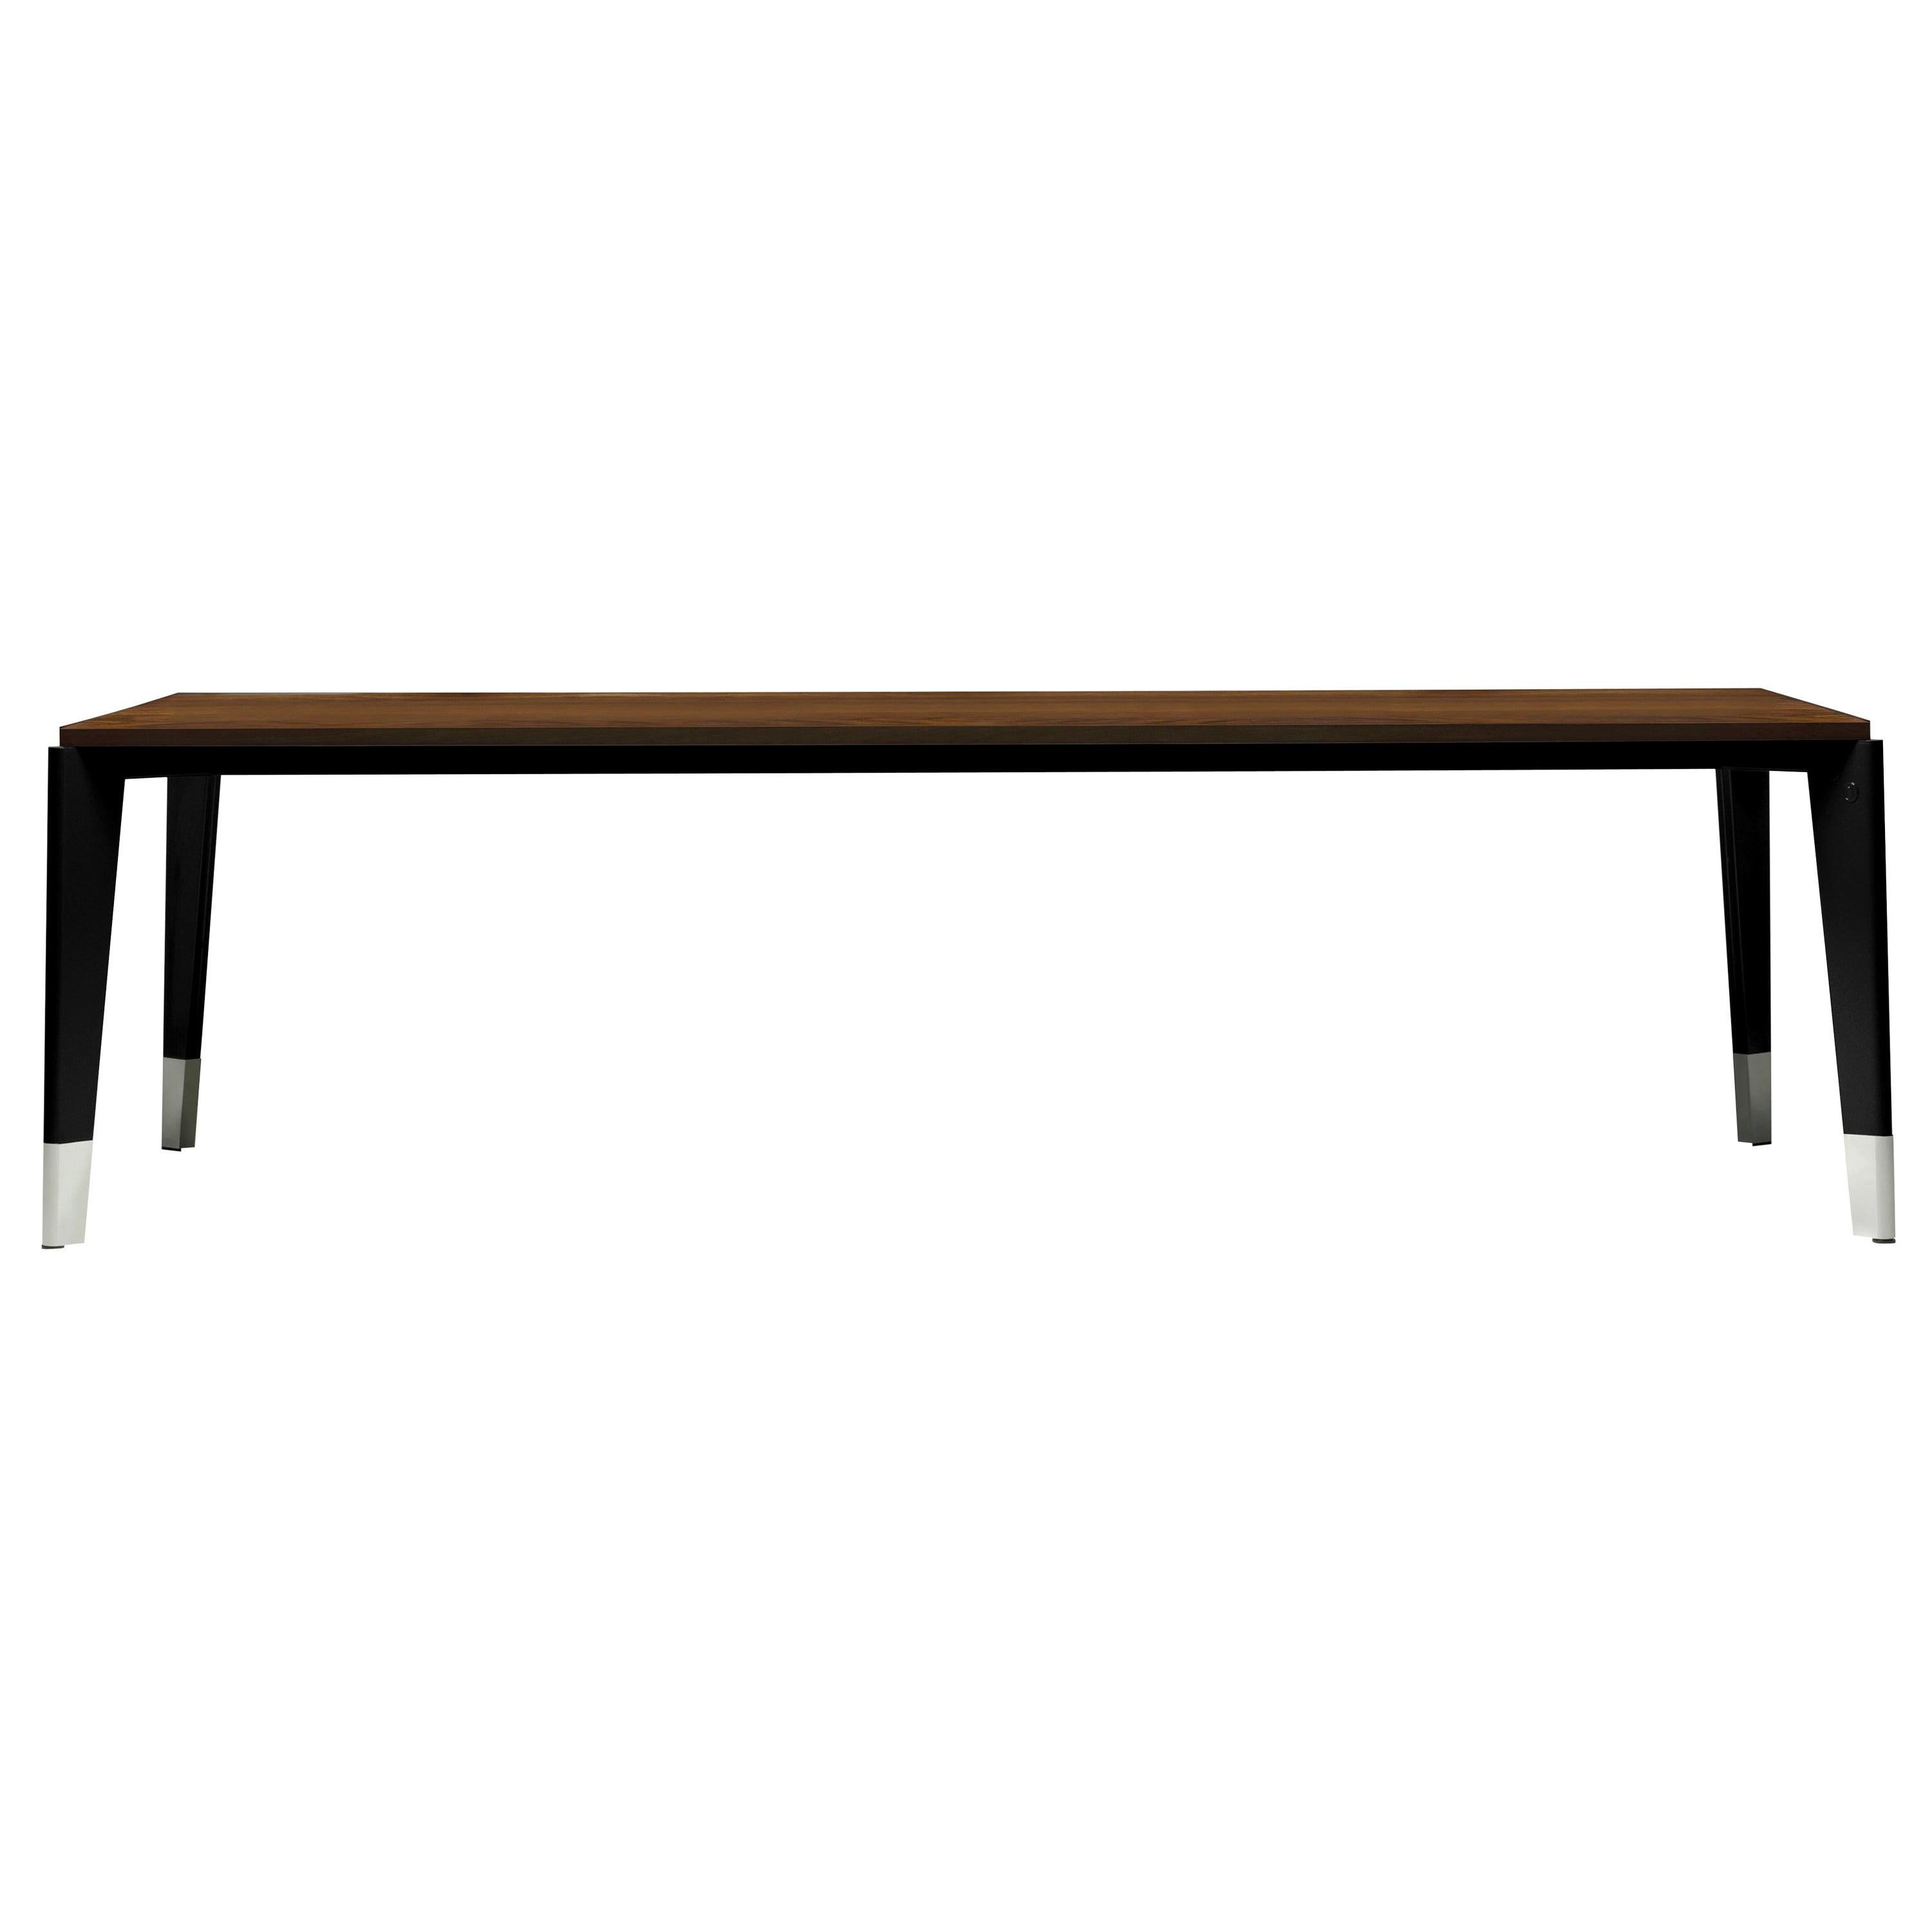 Vitra Flavigny Table in American Walnut by Jean Prouvé